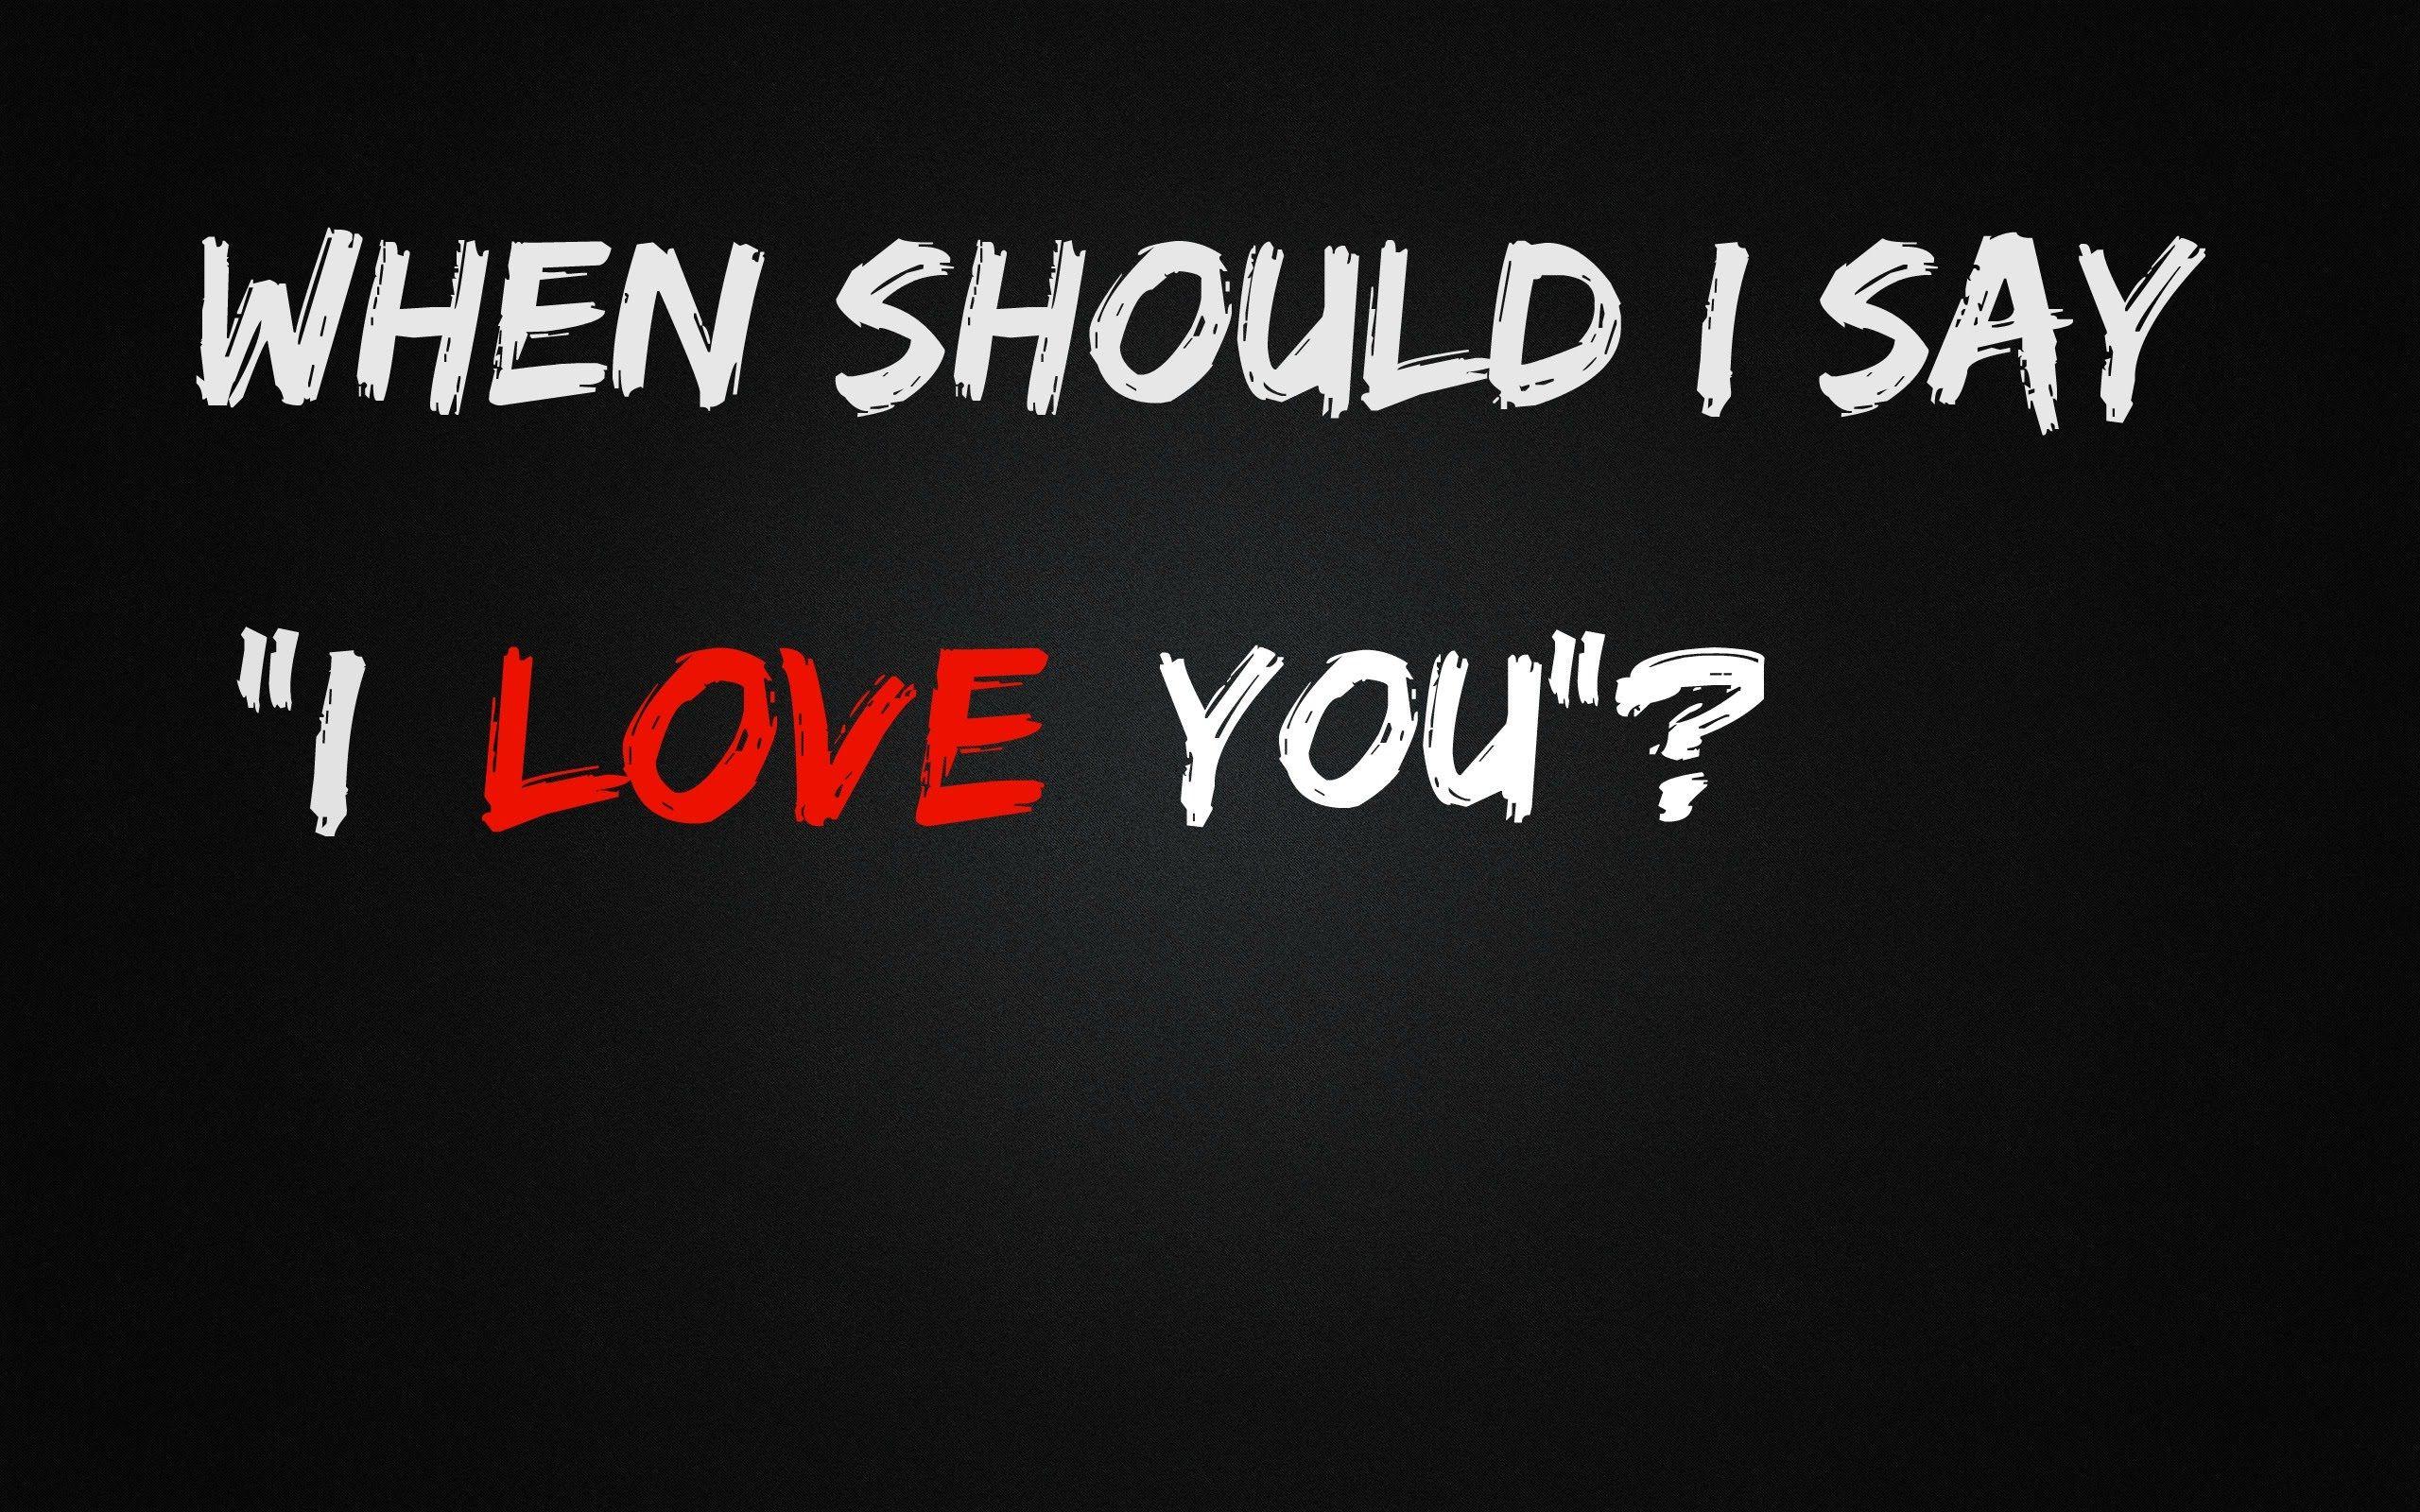 When should I say I love you to my boyfriend or girlfriend?